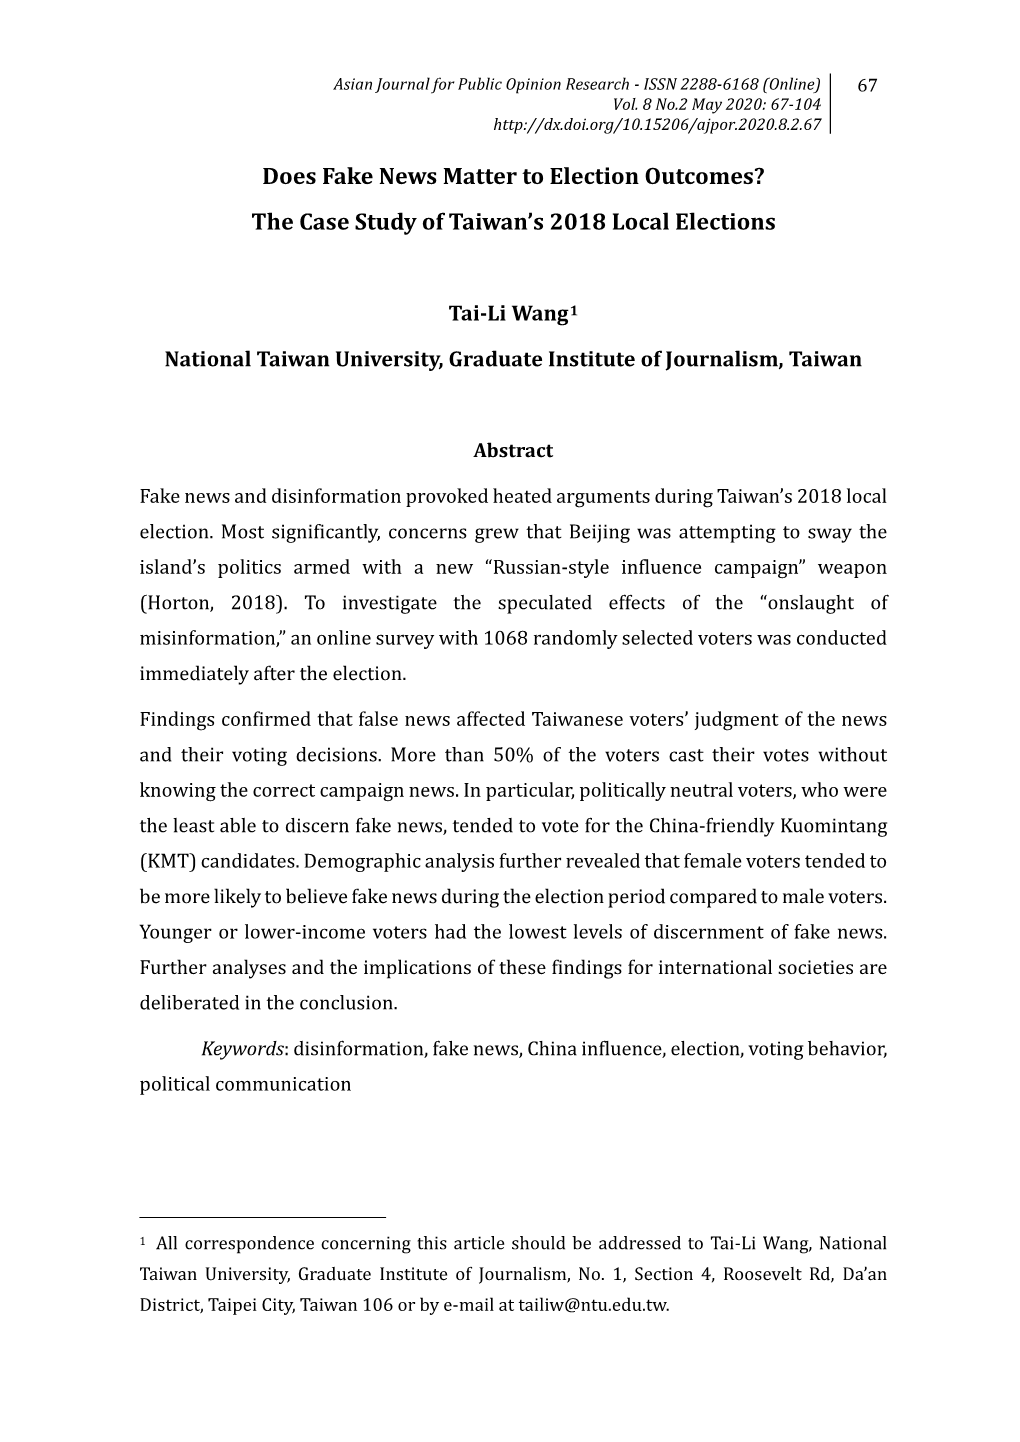 Does Fake News Matter to Election Outcomes? the Case Study of Taiwan’S 2018 Local Elections